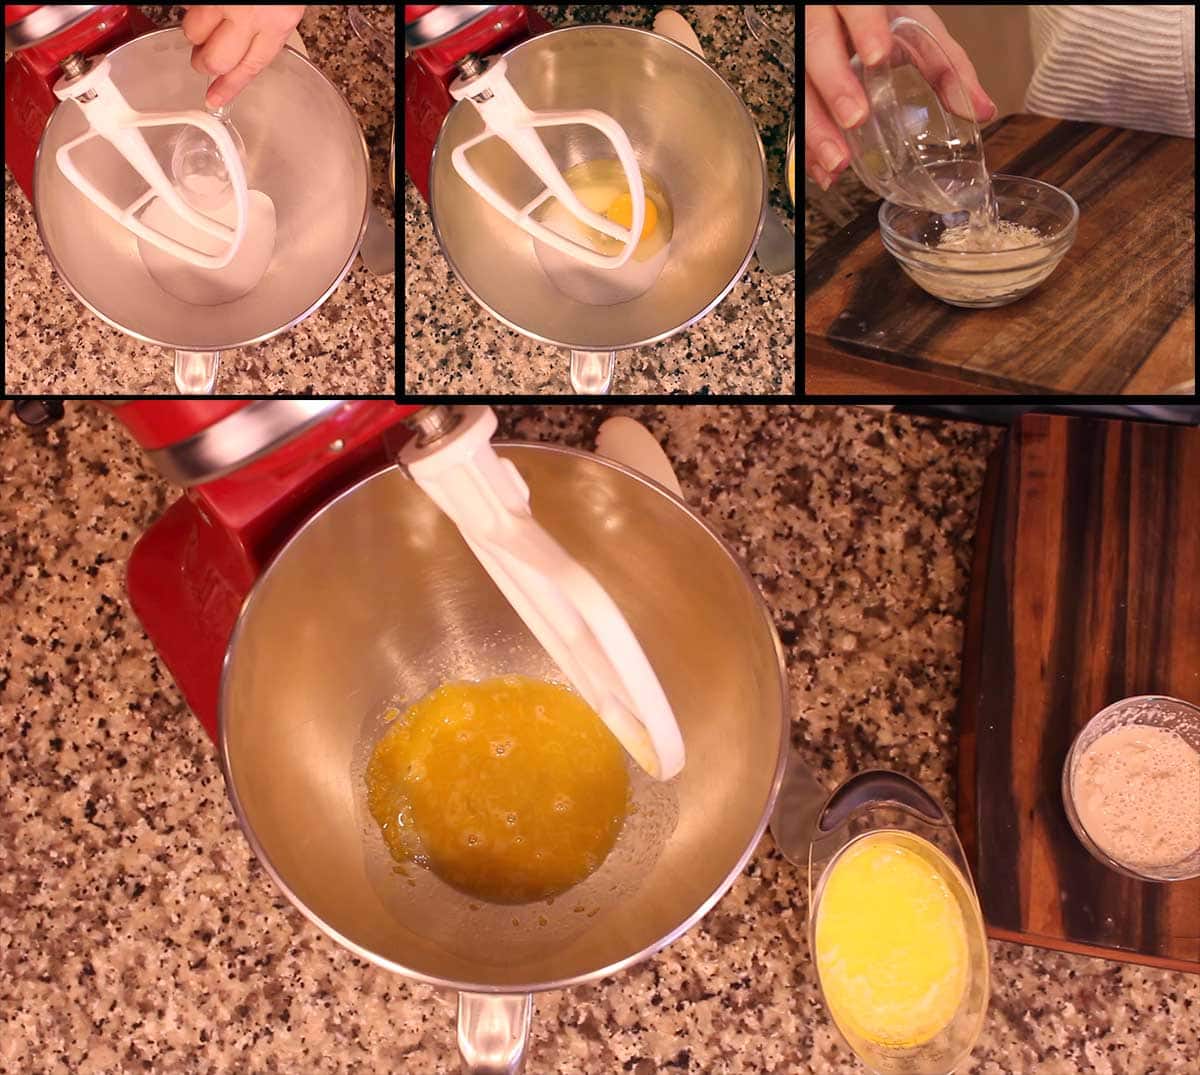 MIxing the eggs and sugar and proofing the yeast